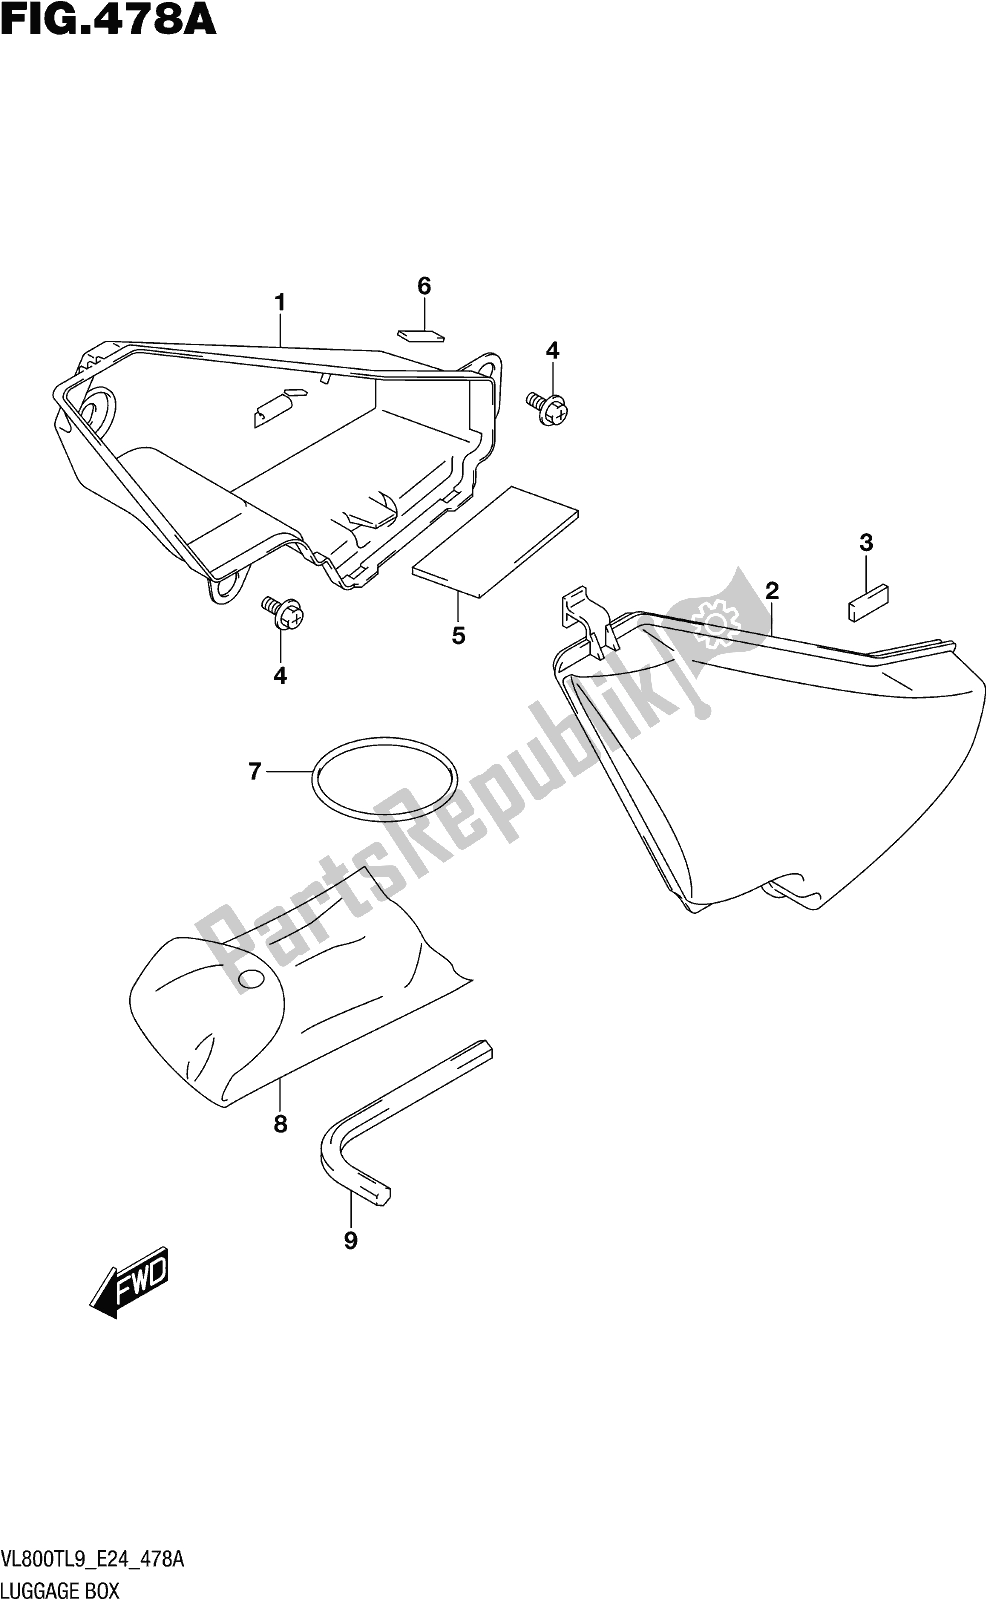 All parts for the Fig. 478a Luggage Box of the Suzuki VL 800T 2019